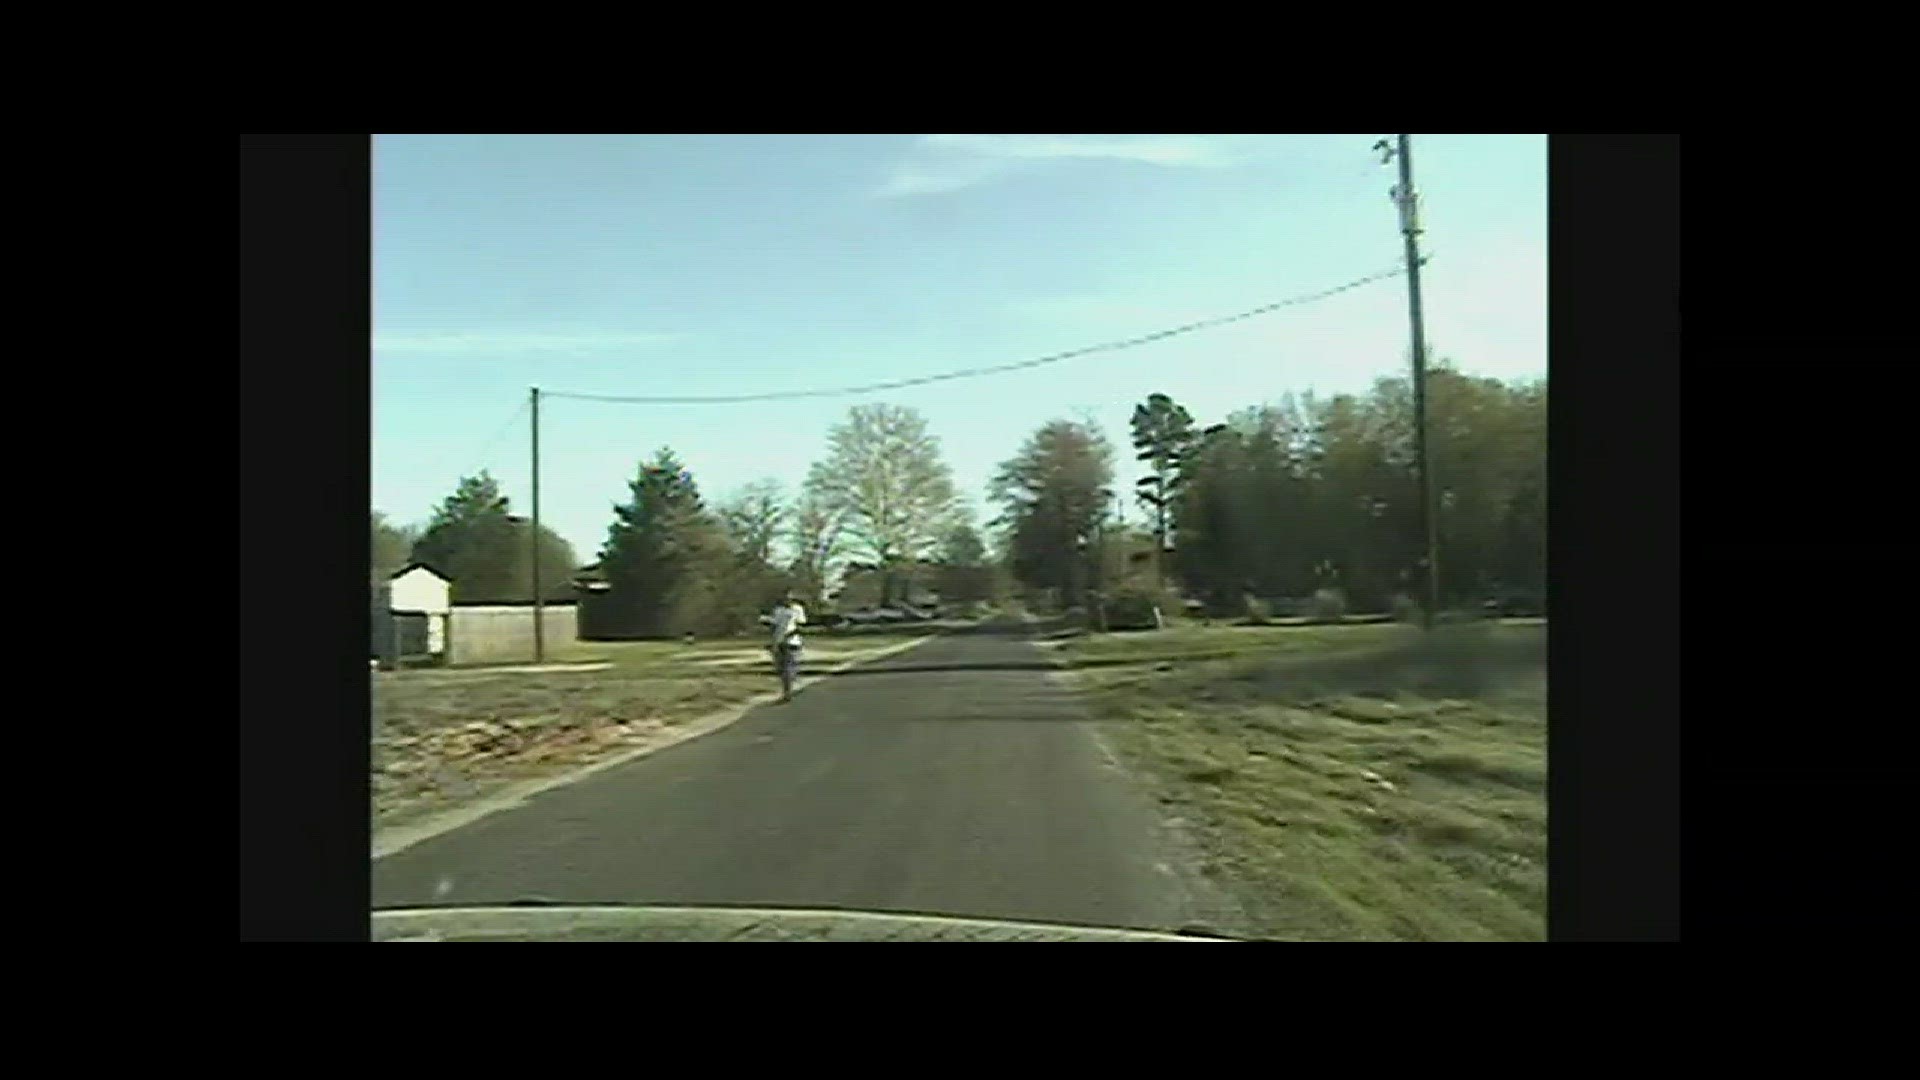 Dabrett Black, the man accused of killing a state trooper on Thanksgiving Day, is seen on a dashcam video beating a different DPS trooper in 2015. The charge was lowered in that case.